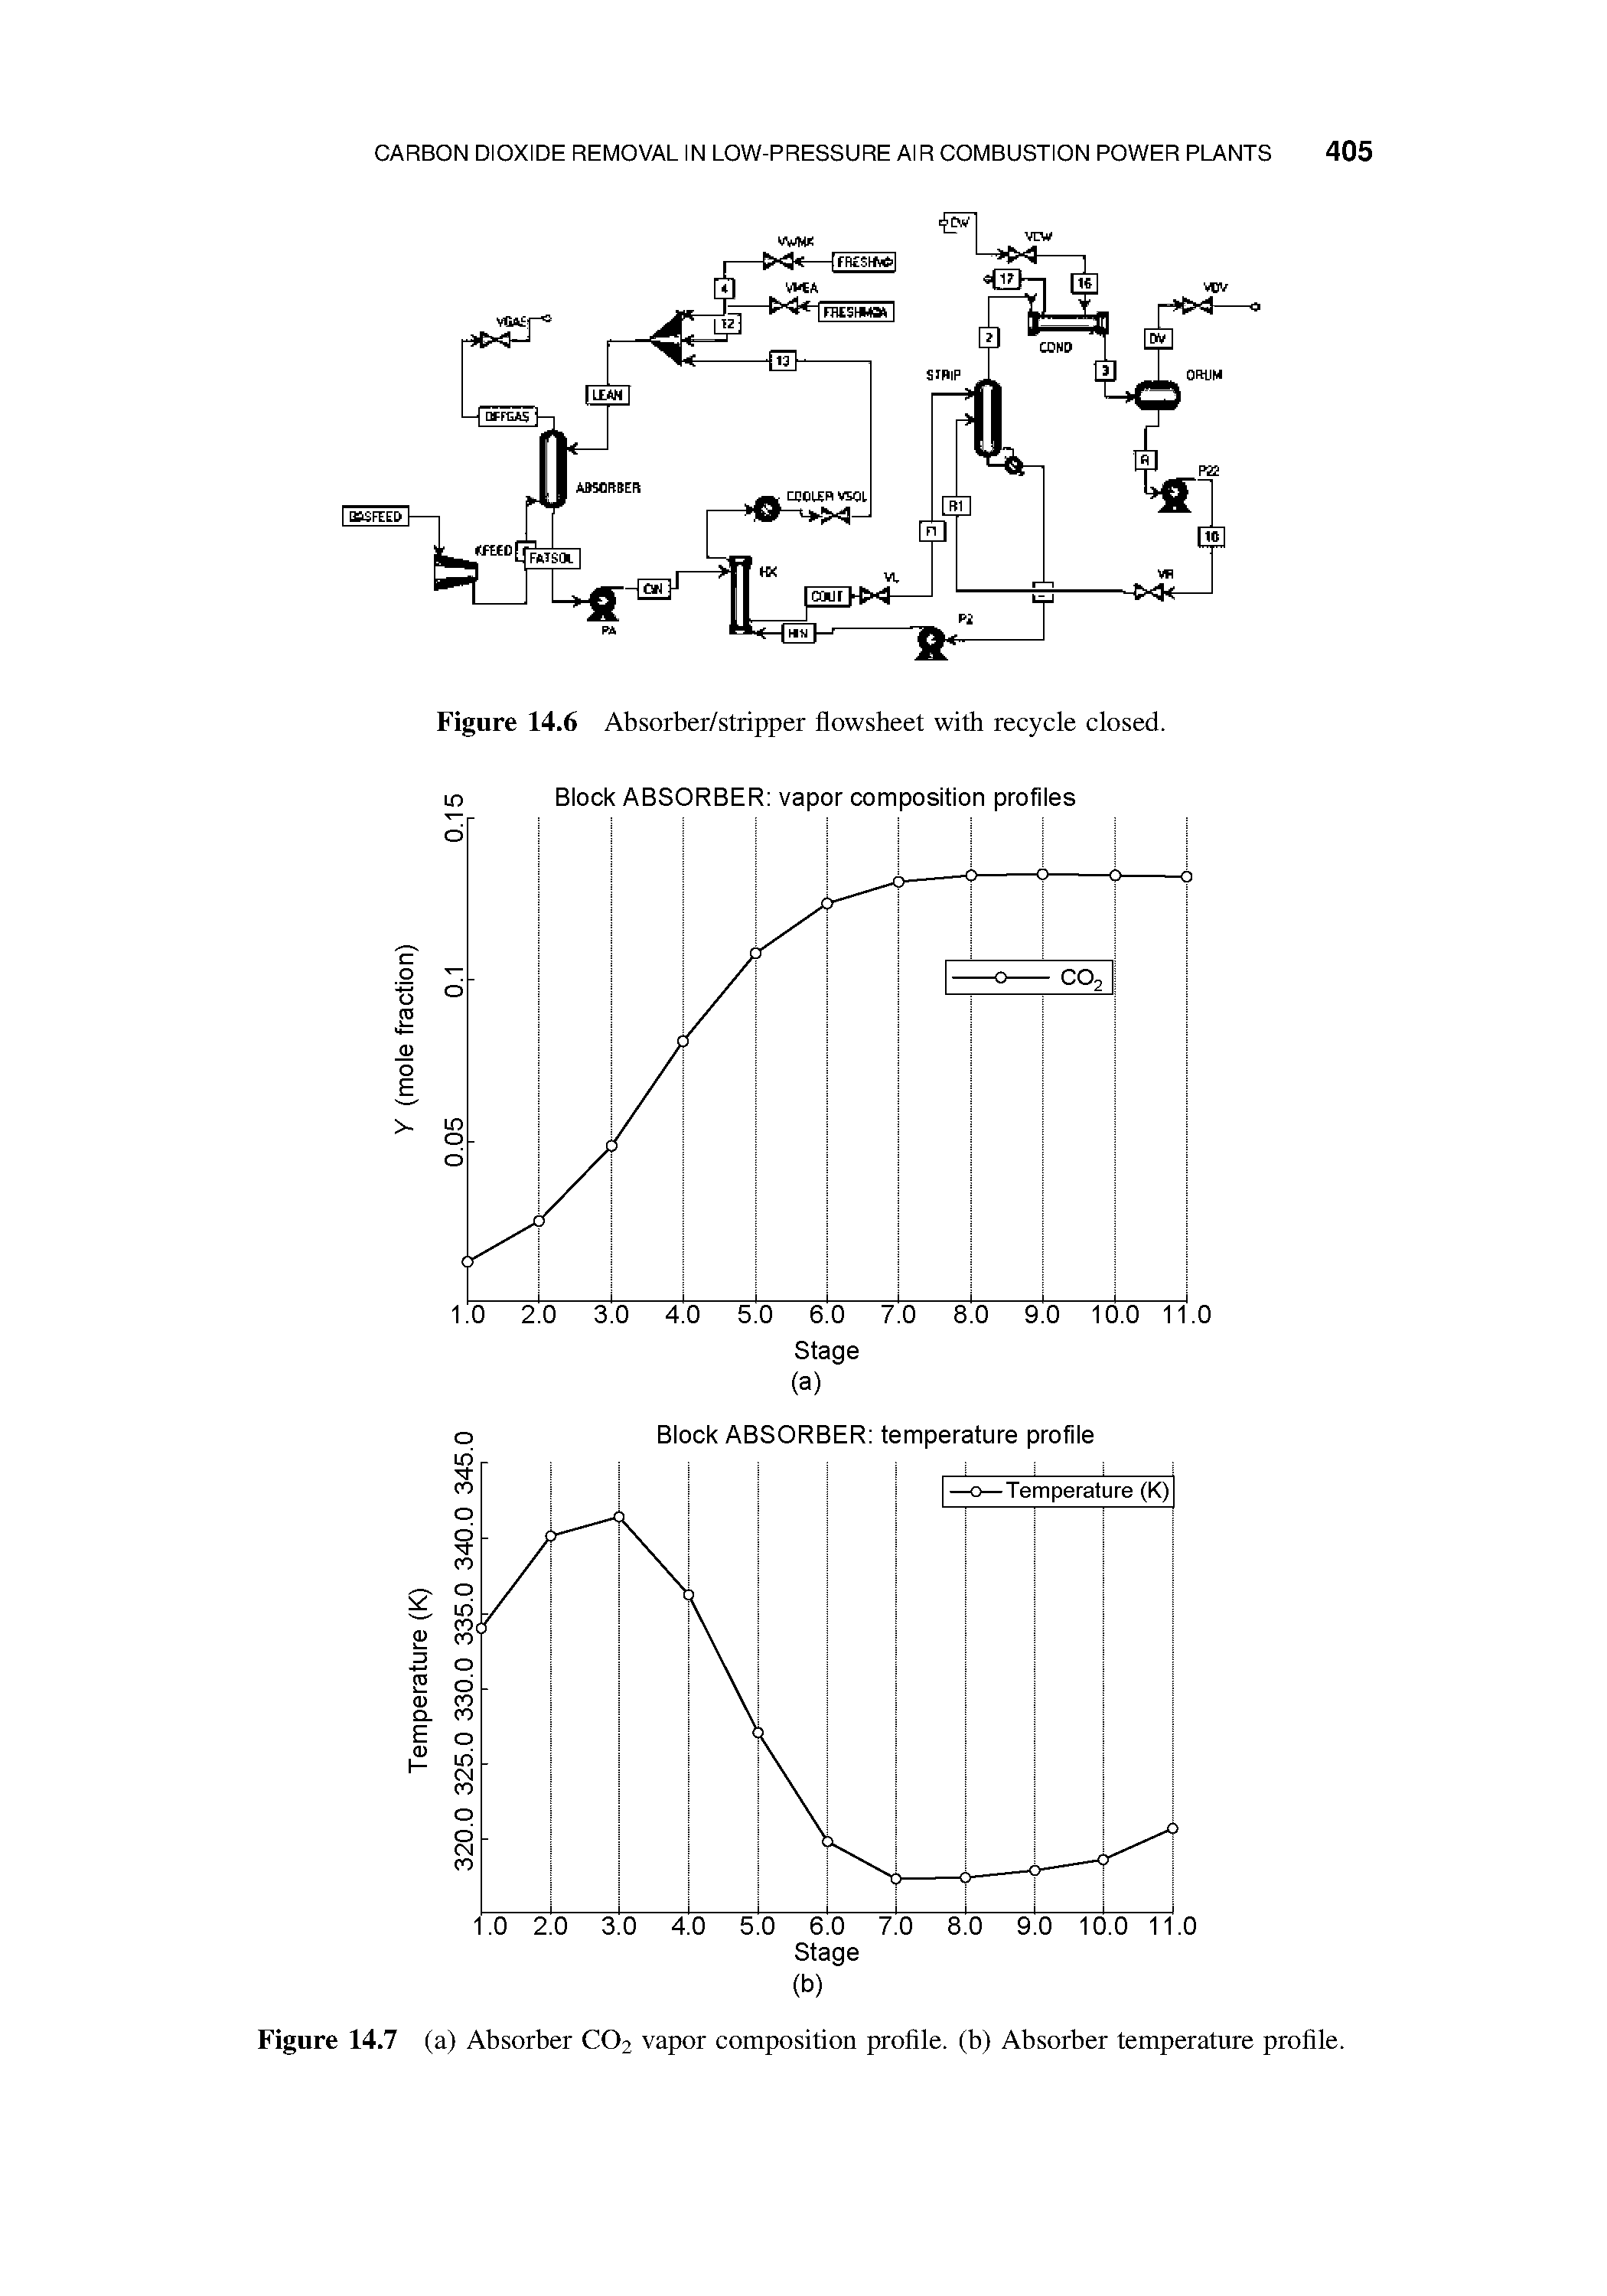 Figure 14.6 Absorber/stripper flowsheet with recycle closed. Block ABSORBER vapor composition profiles...